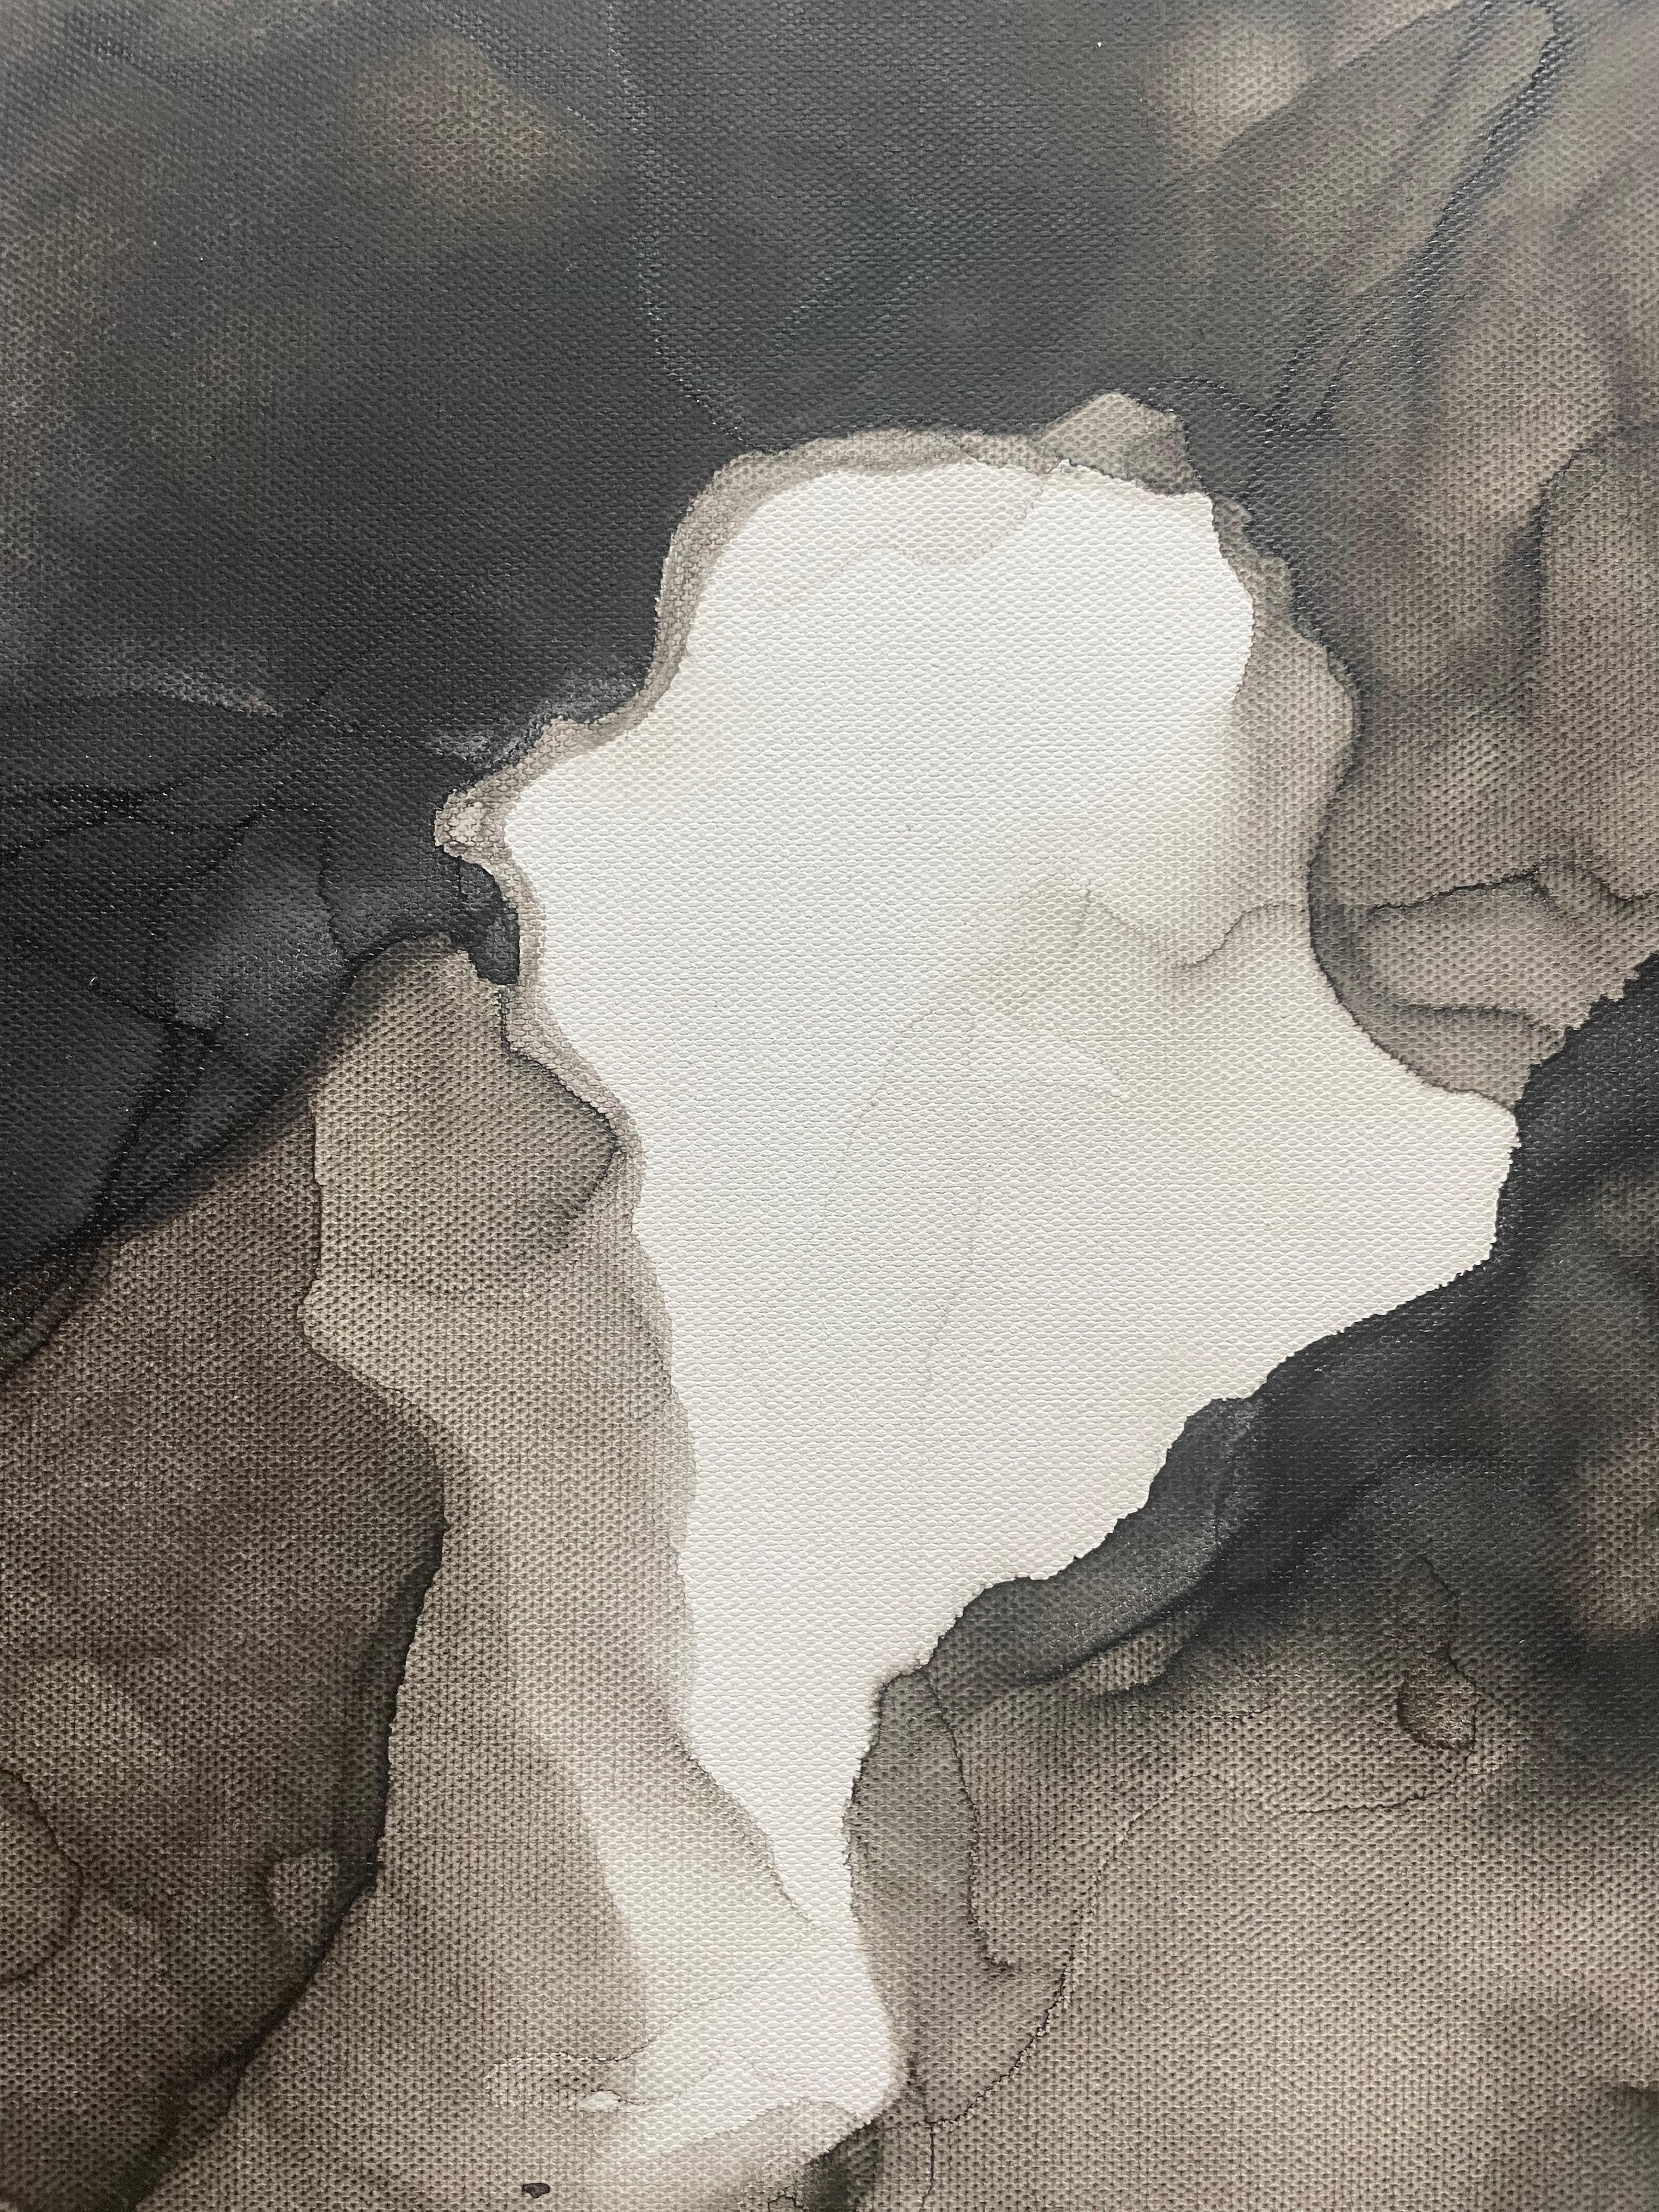 Untitled - abstract painting, made in black, grey color - Painting by Mila Akopova